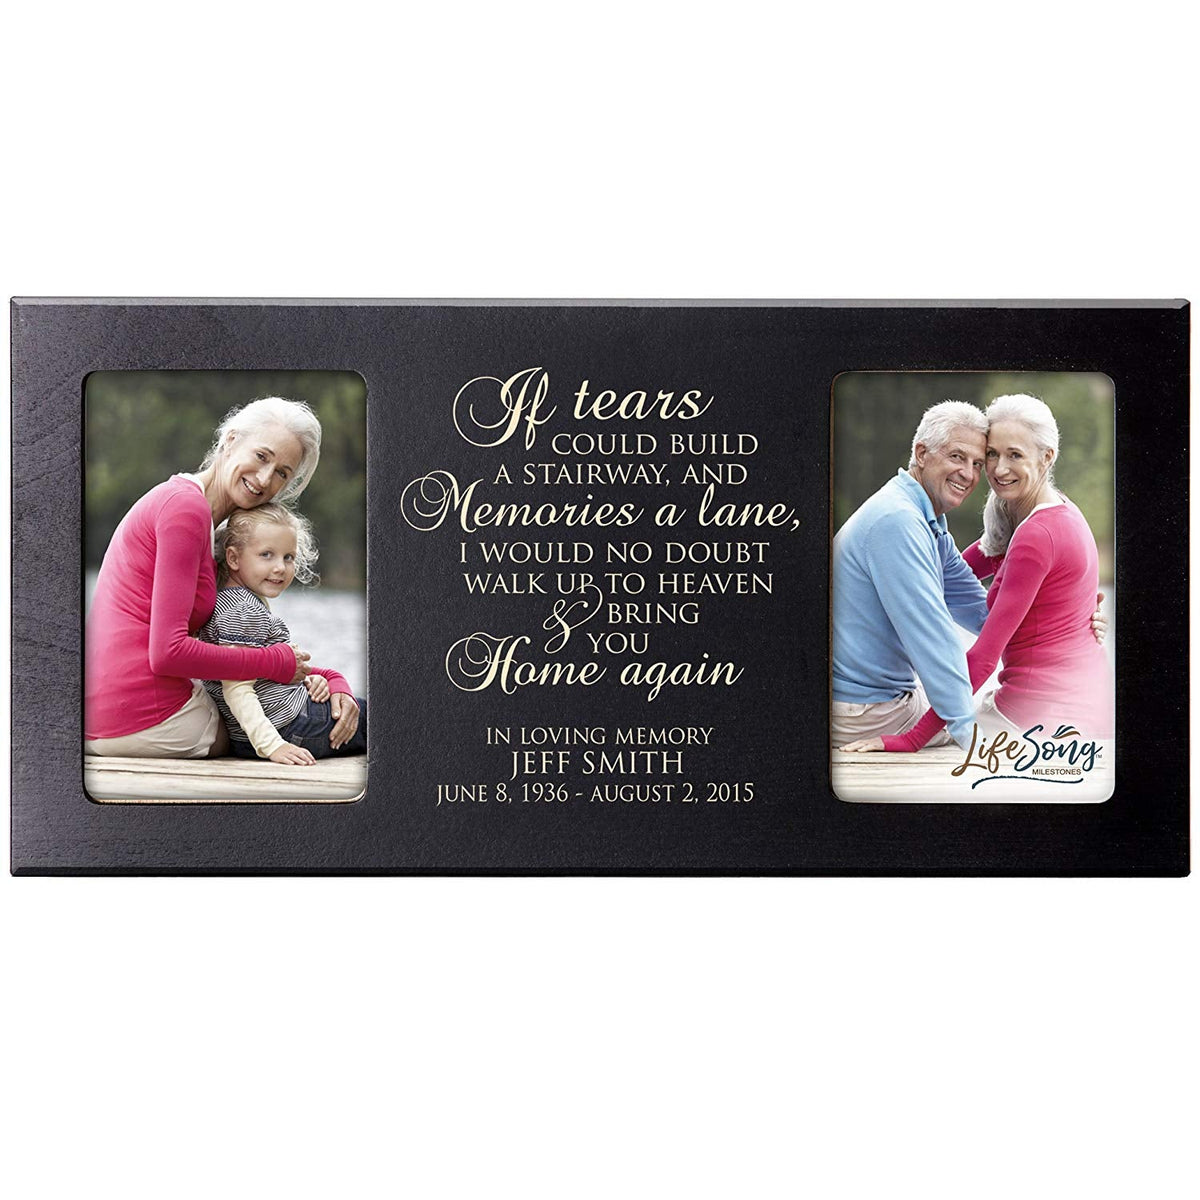 Custom Wooden Memorial Double Picture Frame holds 2-4x6 photo - Stairway To Heaven - LifeSong Milestones